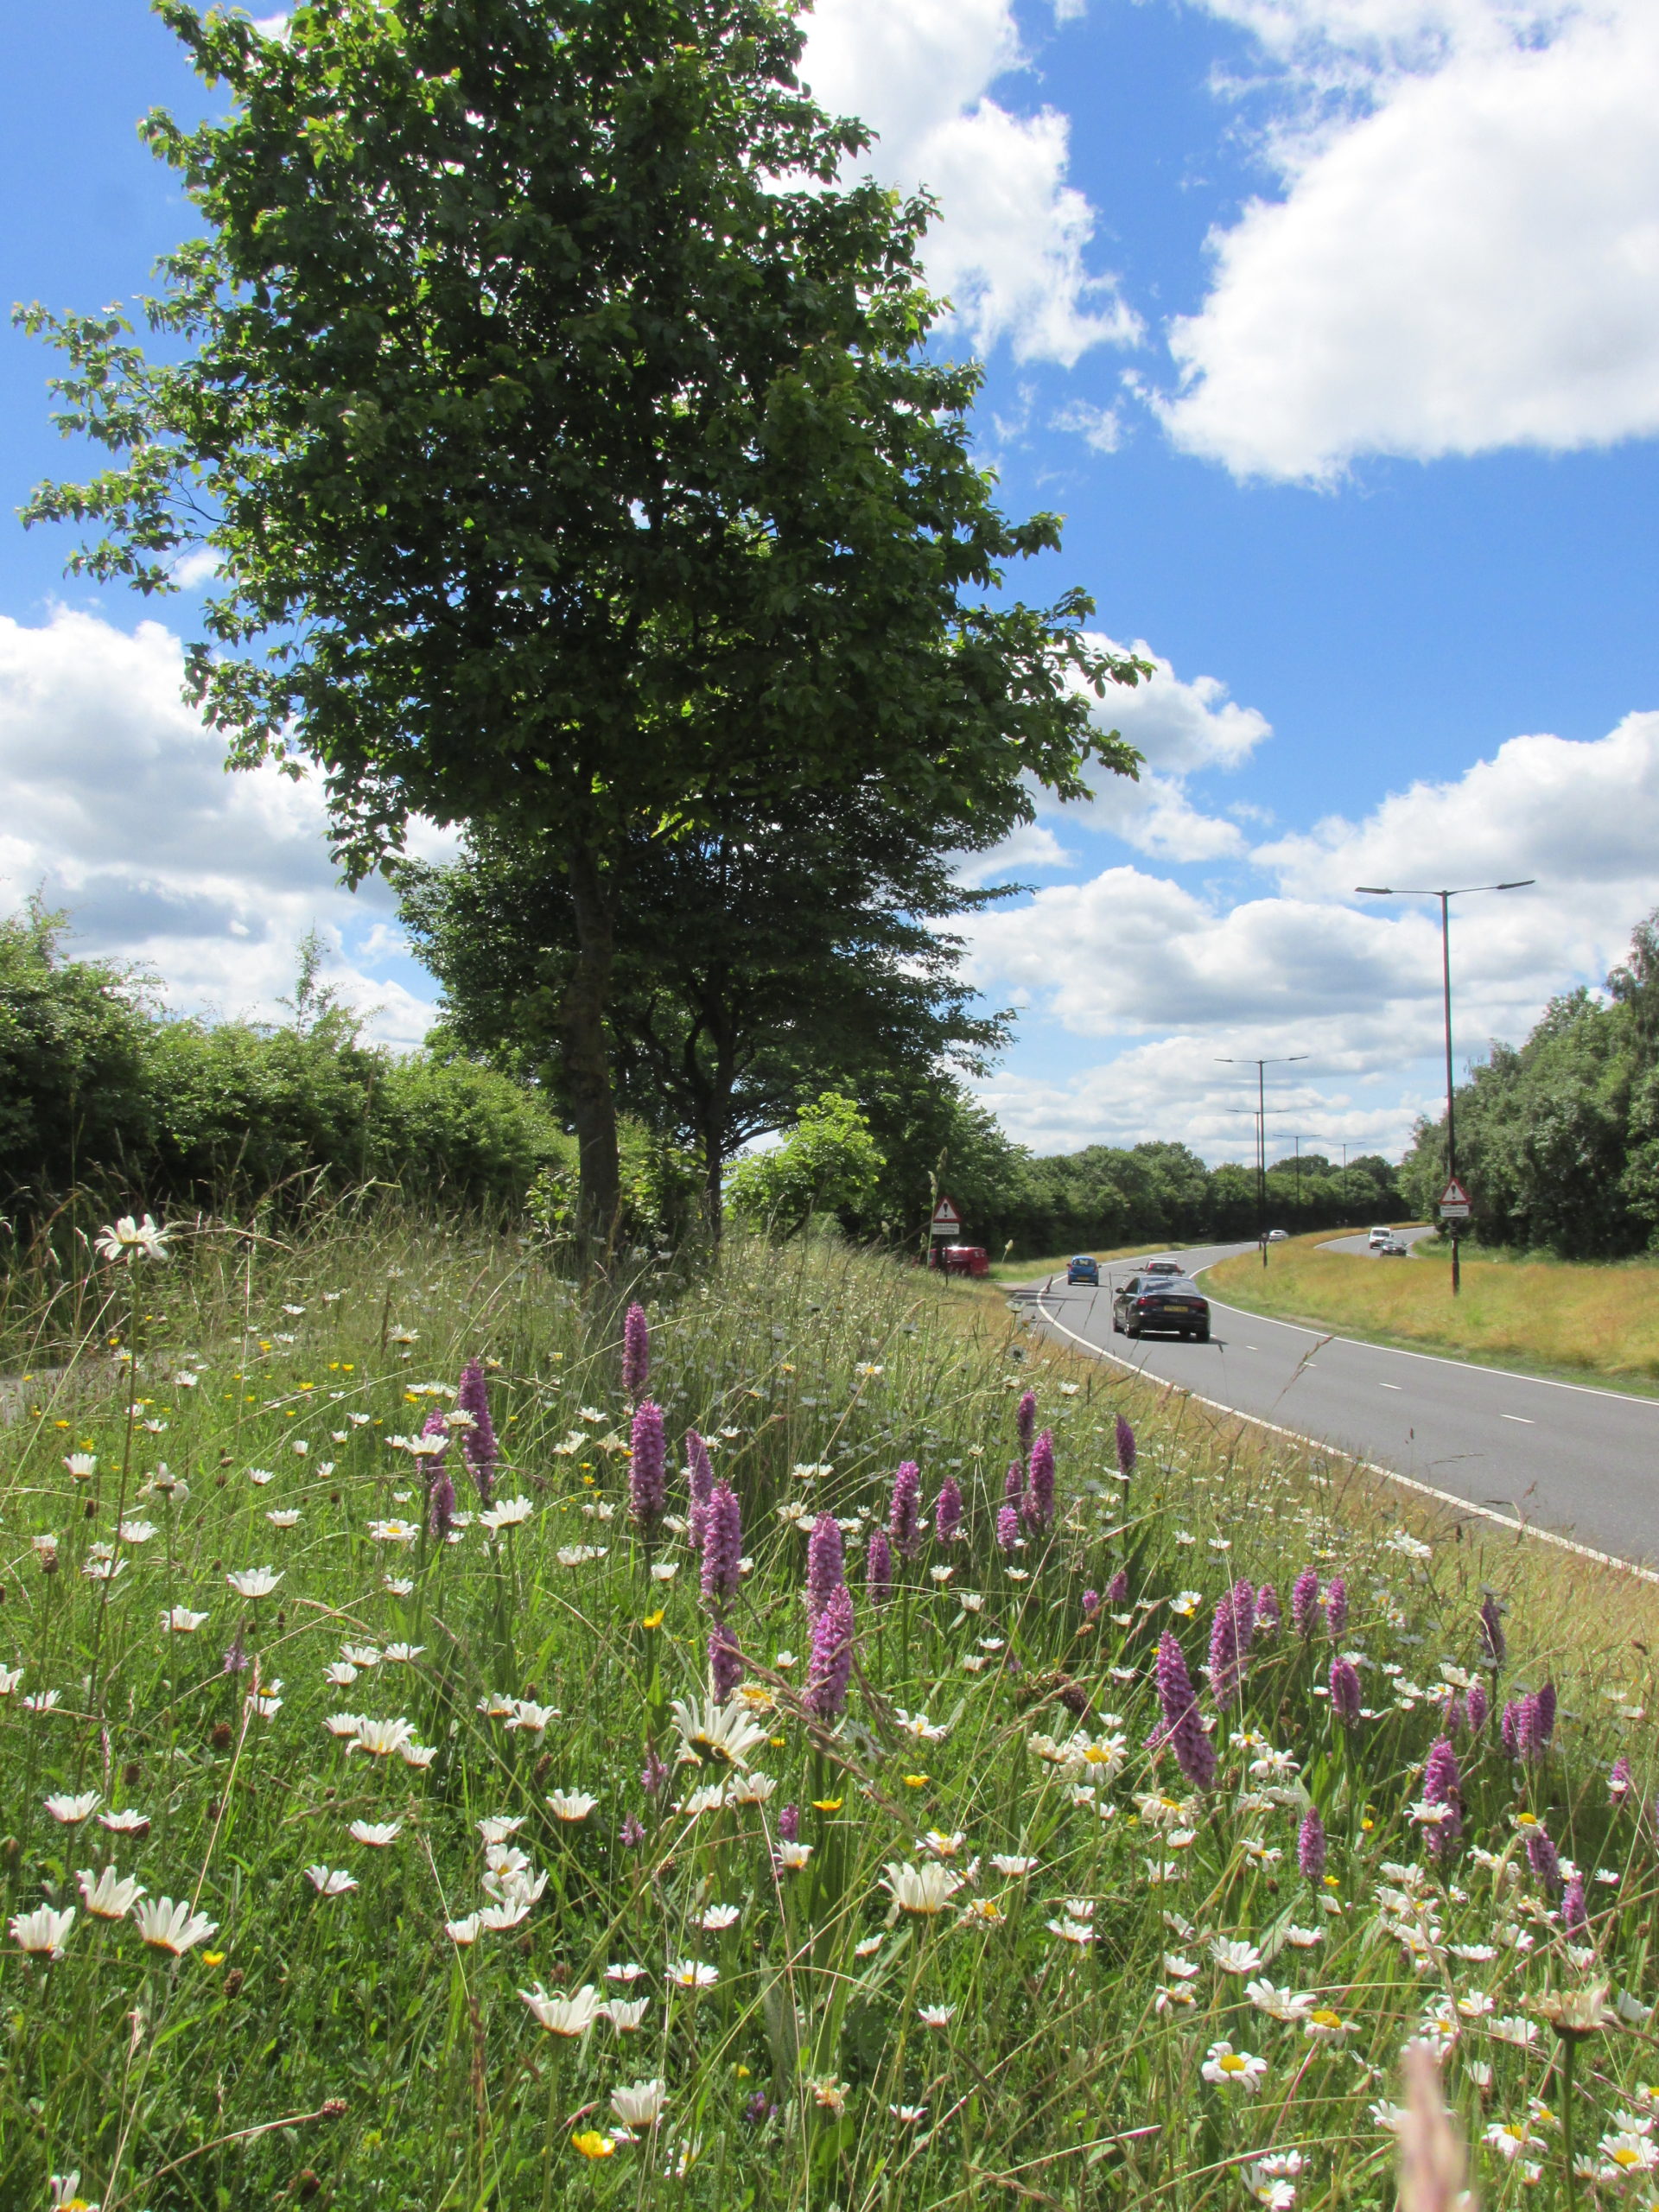 Bochum Parkway after mowing changes showing verge full of white and purple wildflowers